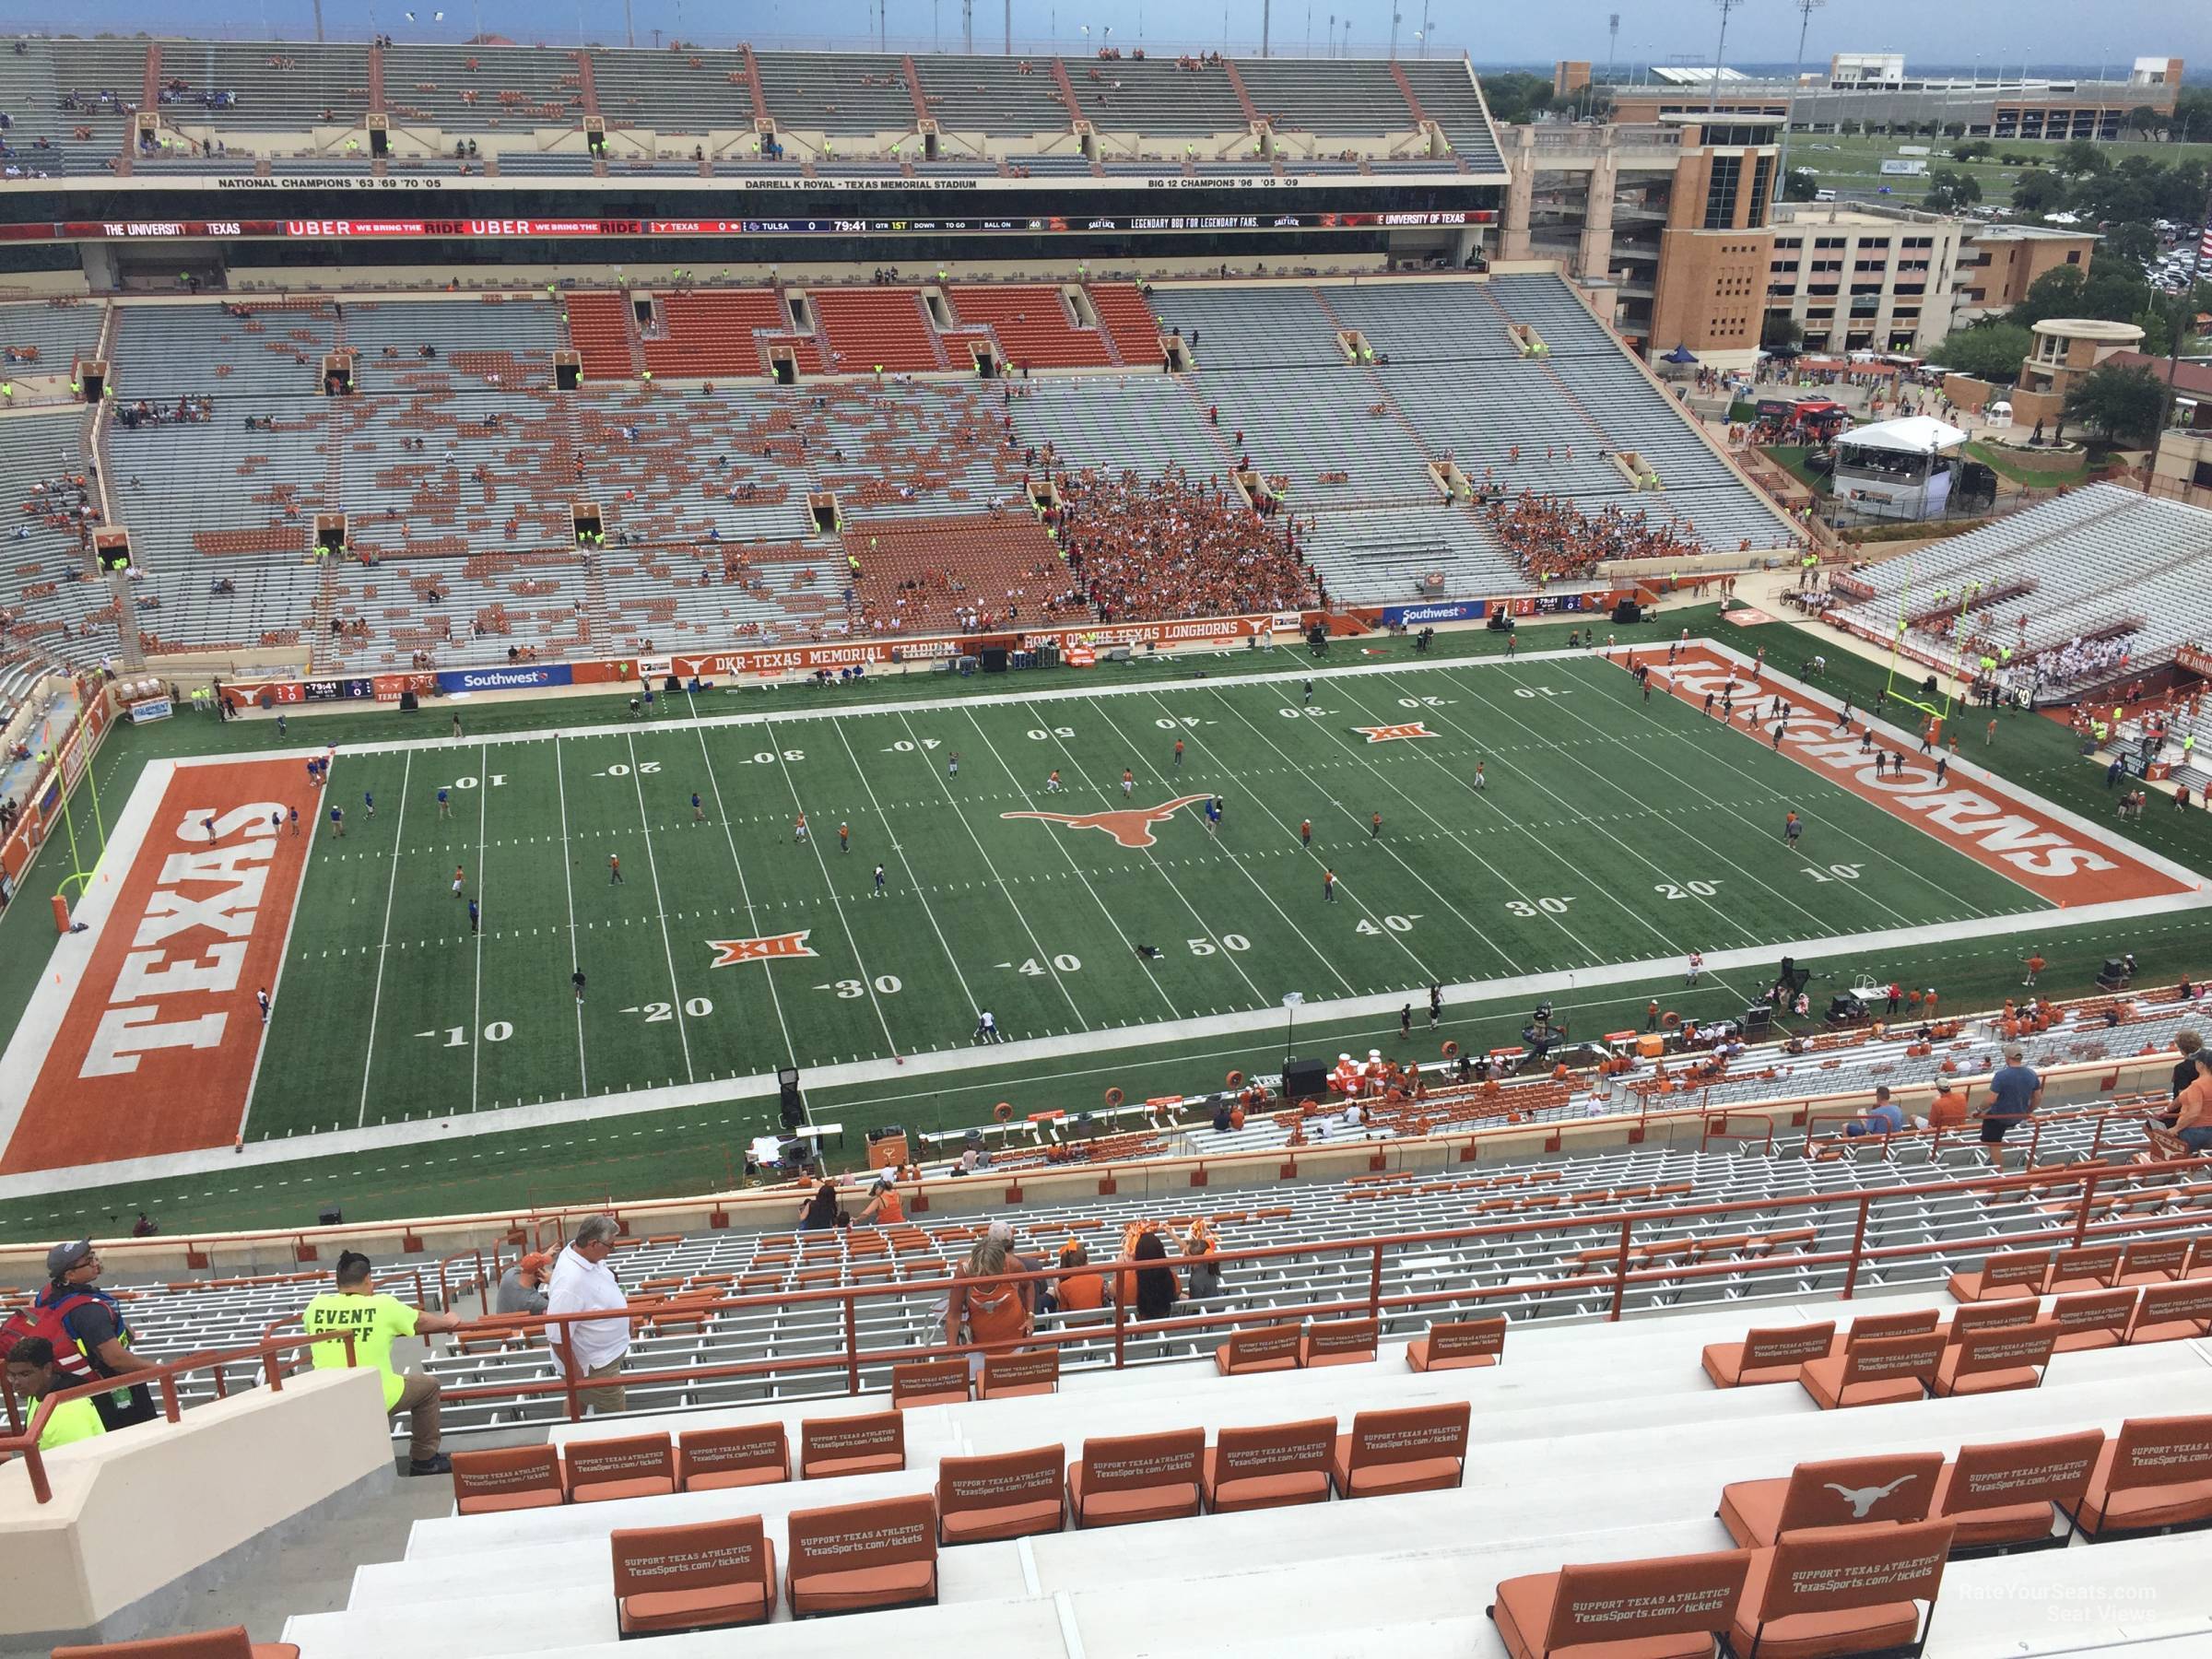 section 106, row 30 seat view  - dkr-texas memorial stadium